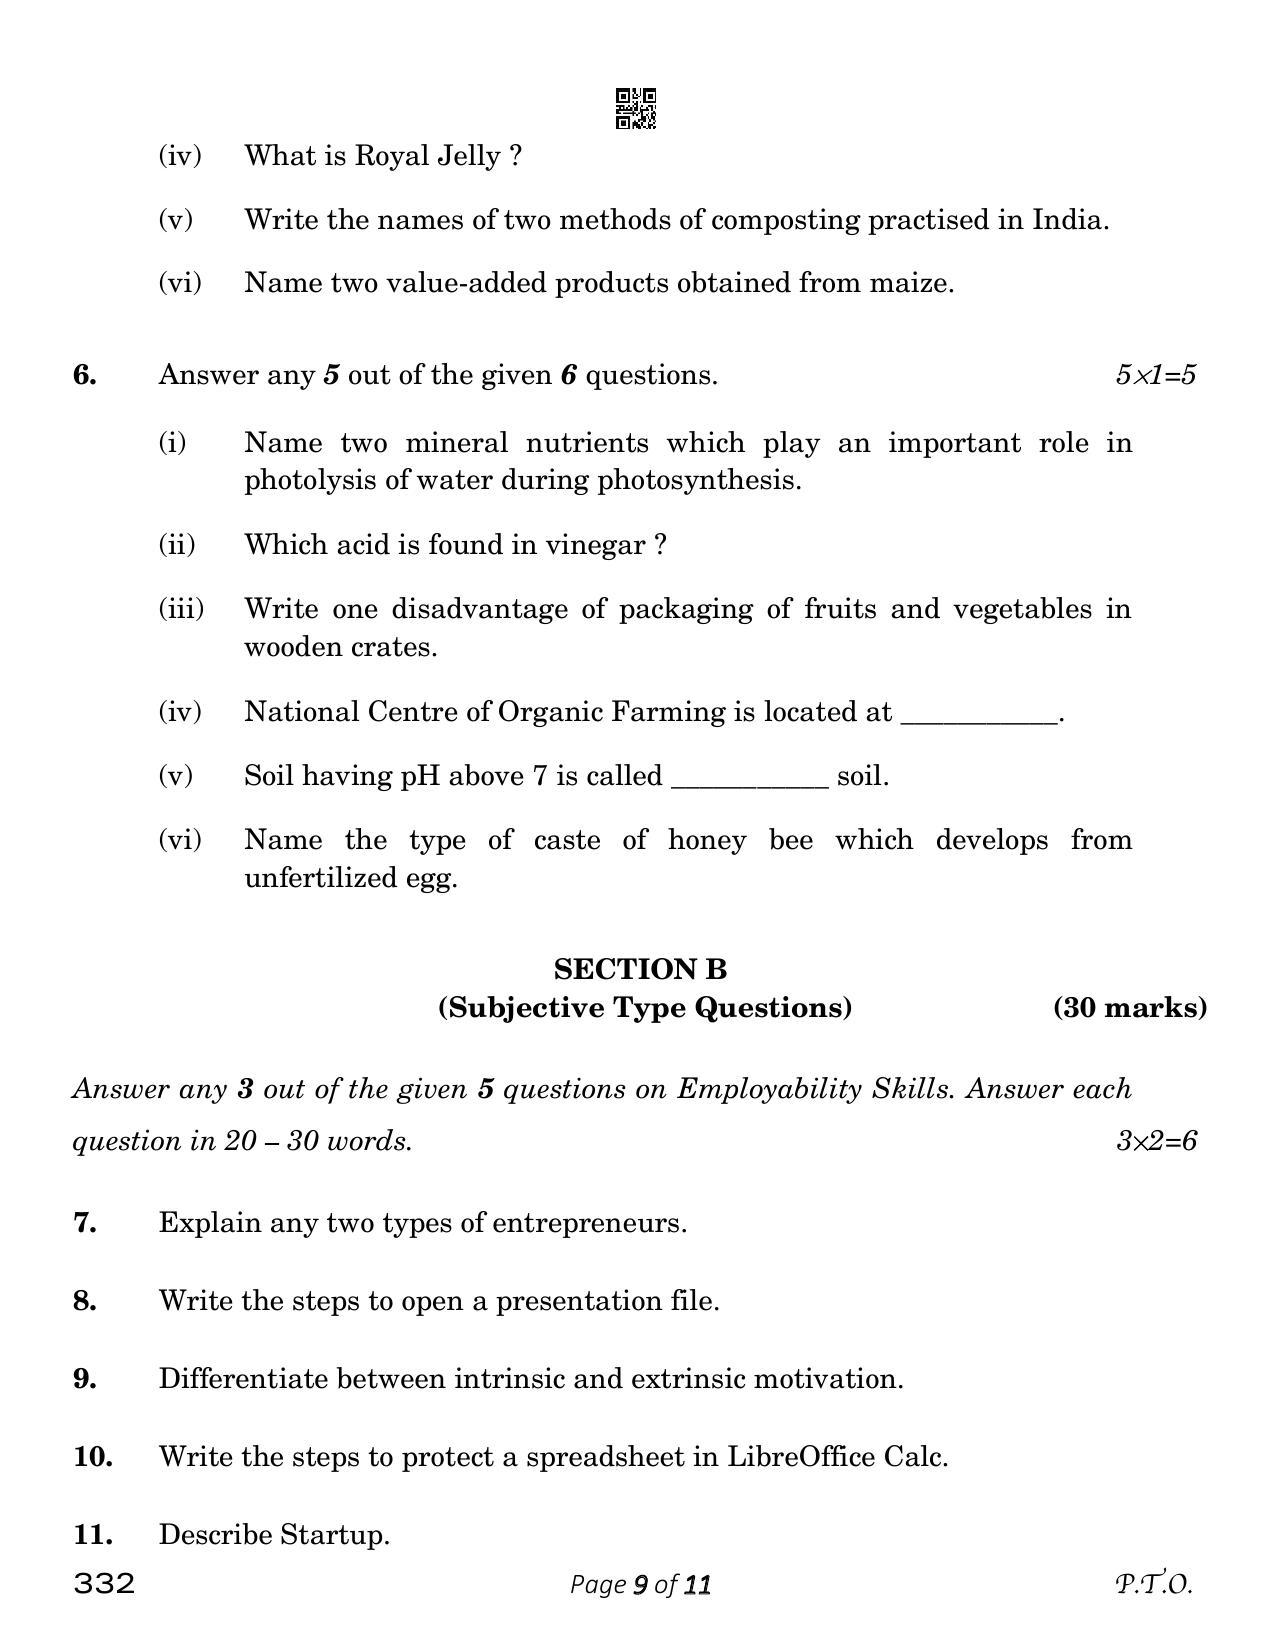 CBSE Class 12 Agriculture (Compartment) 2023 Question Paper - Page 9